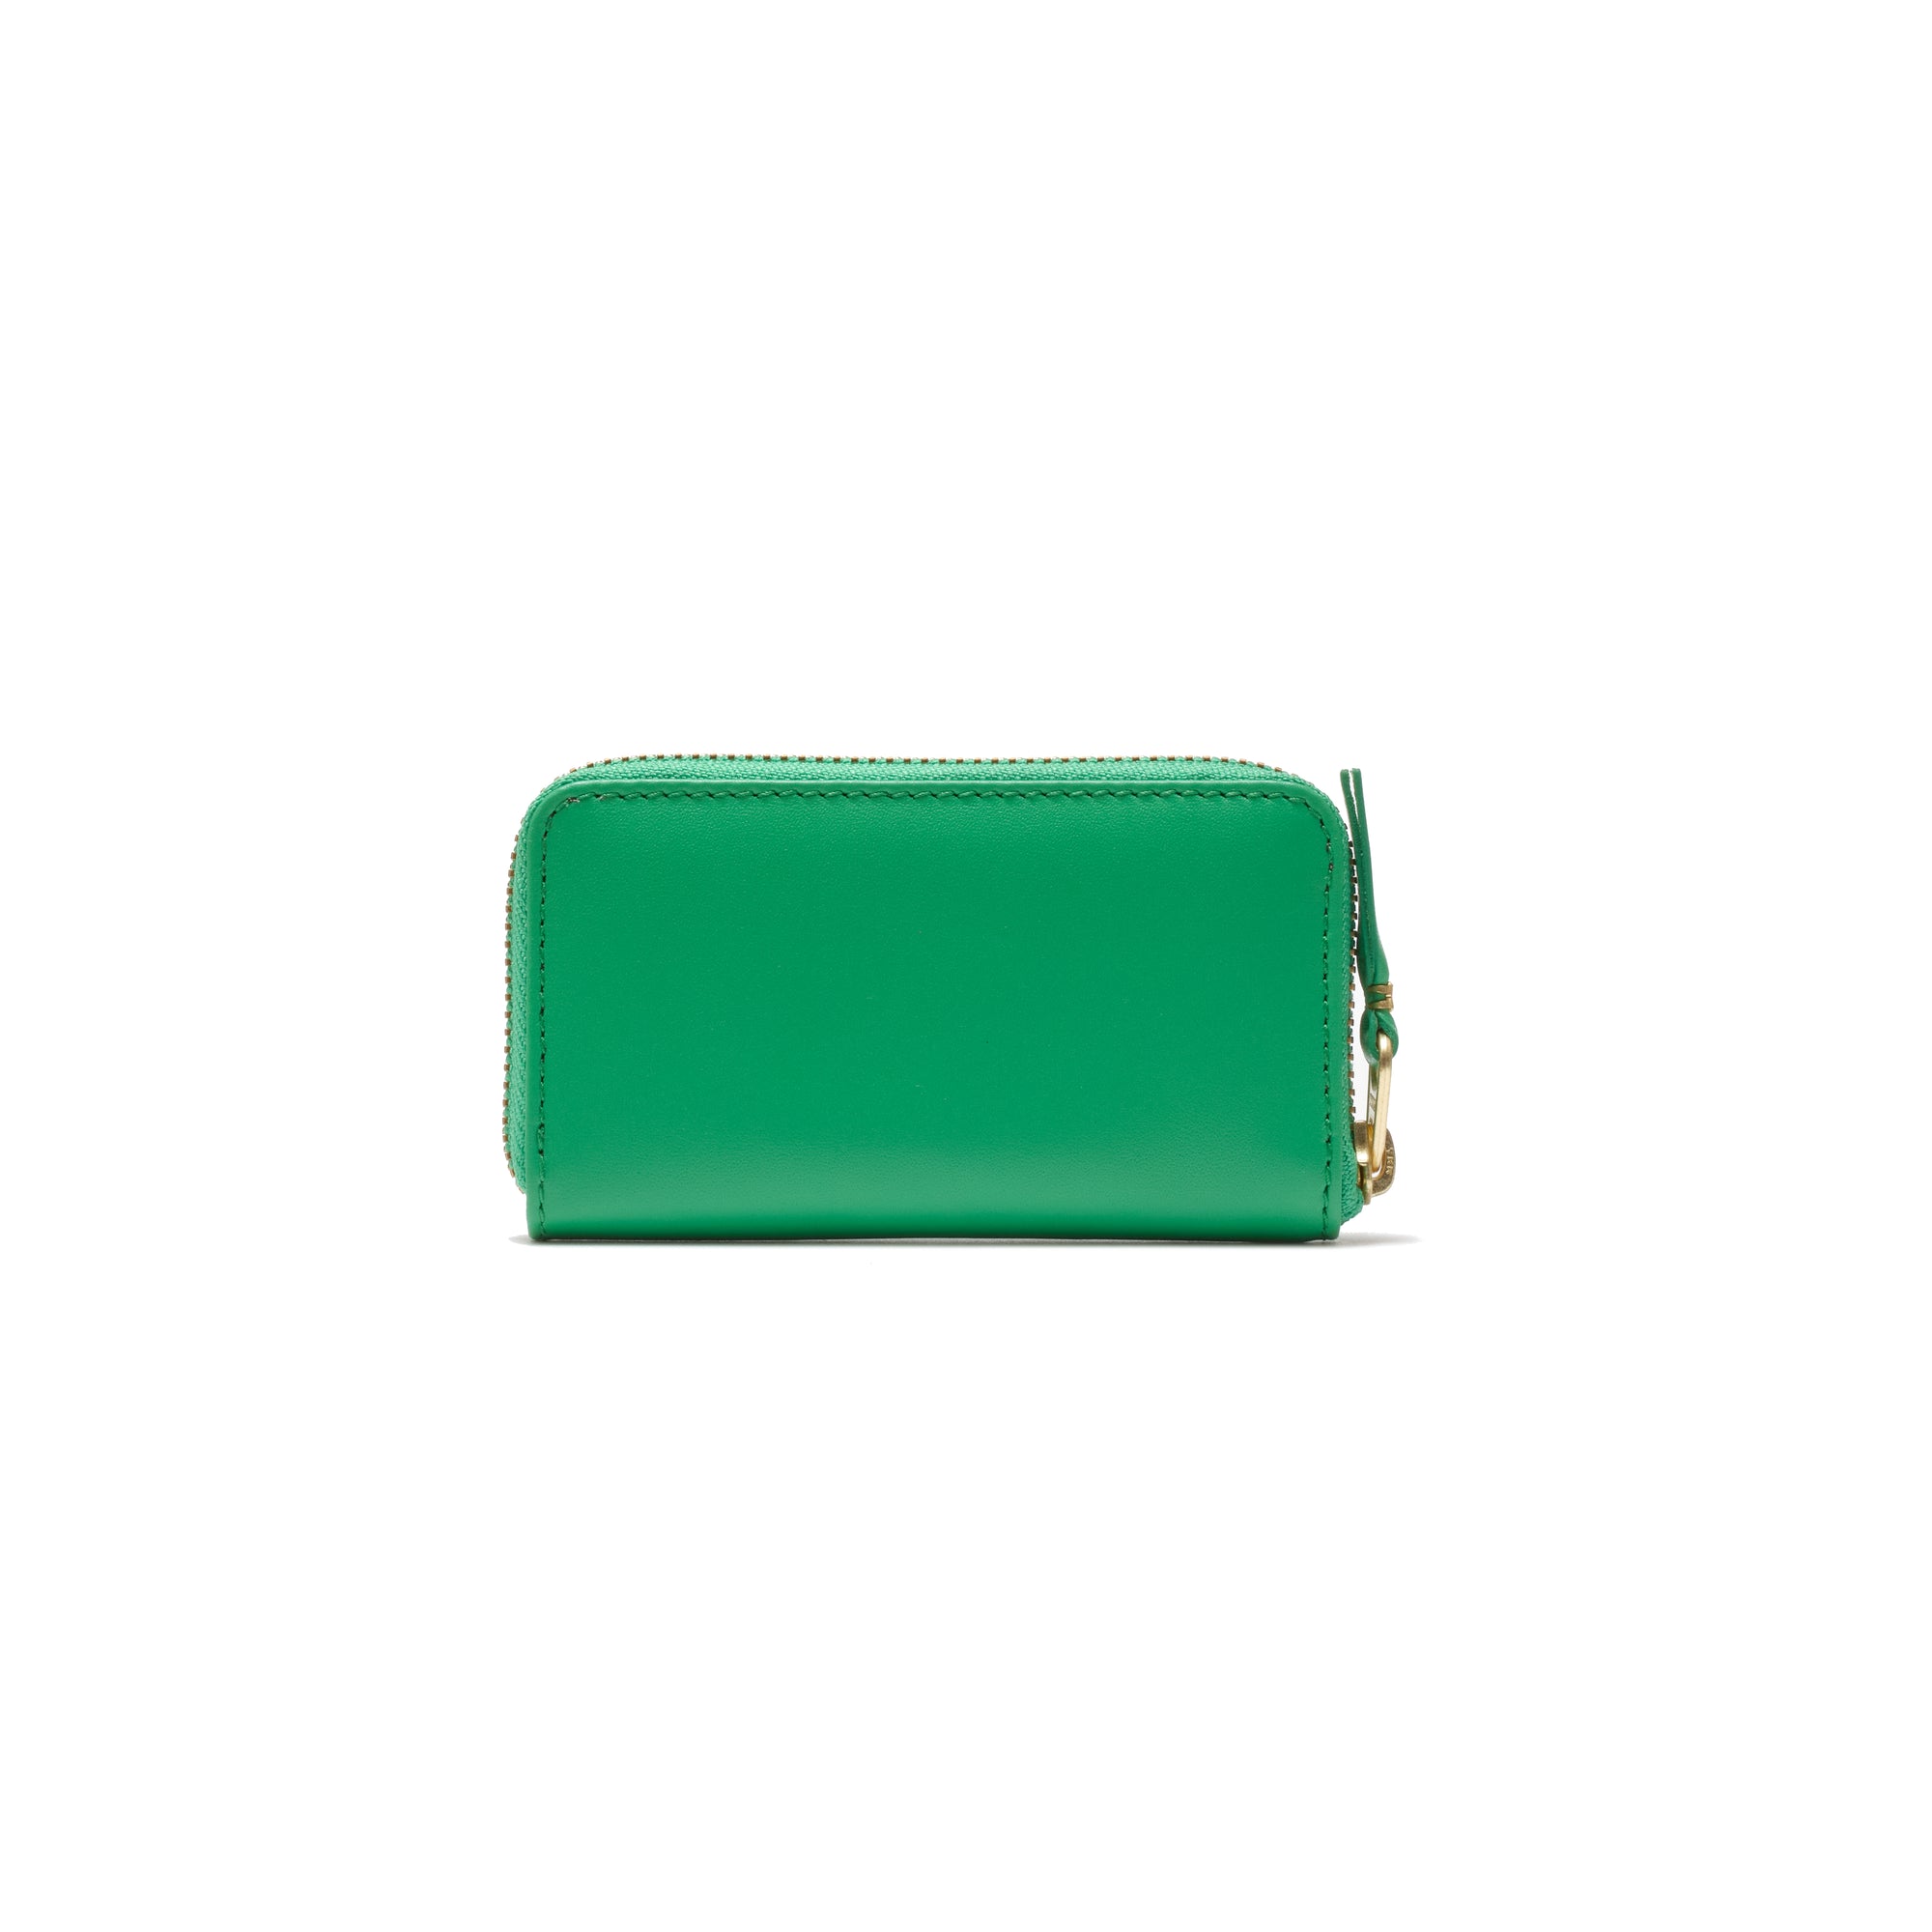 CDG WALLET - Colored Leather Line-8Z-A004 - (Green) view 2